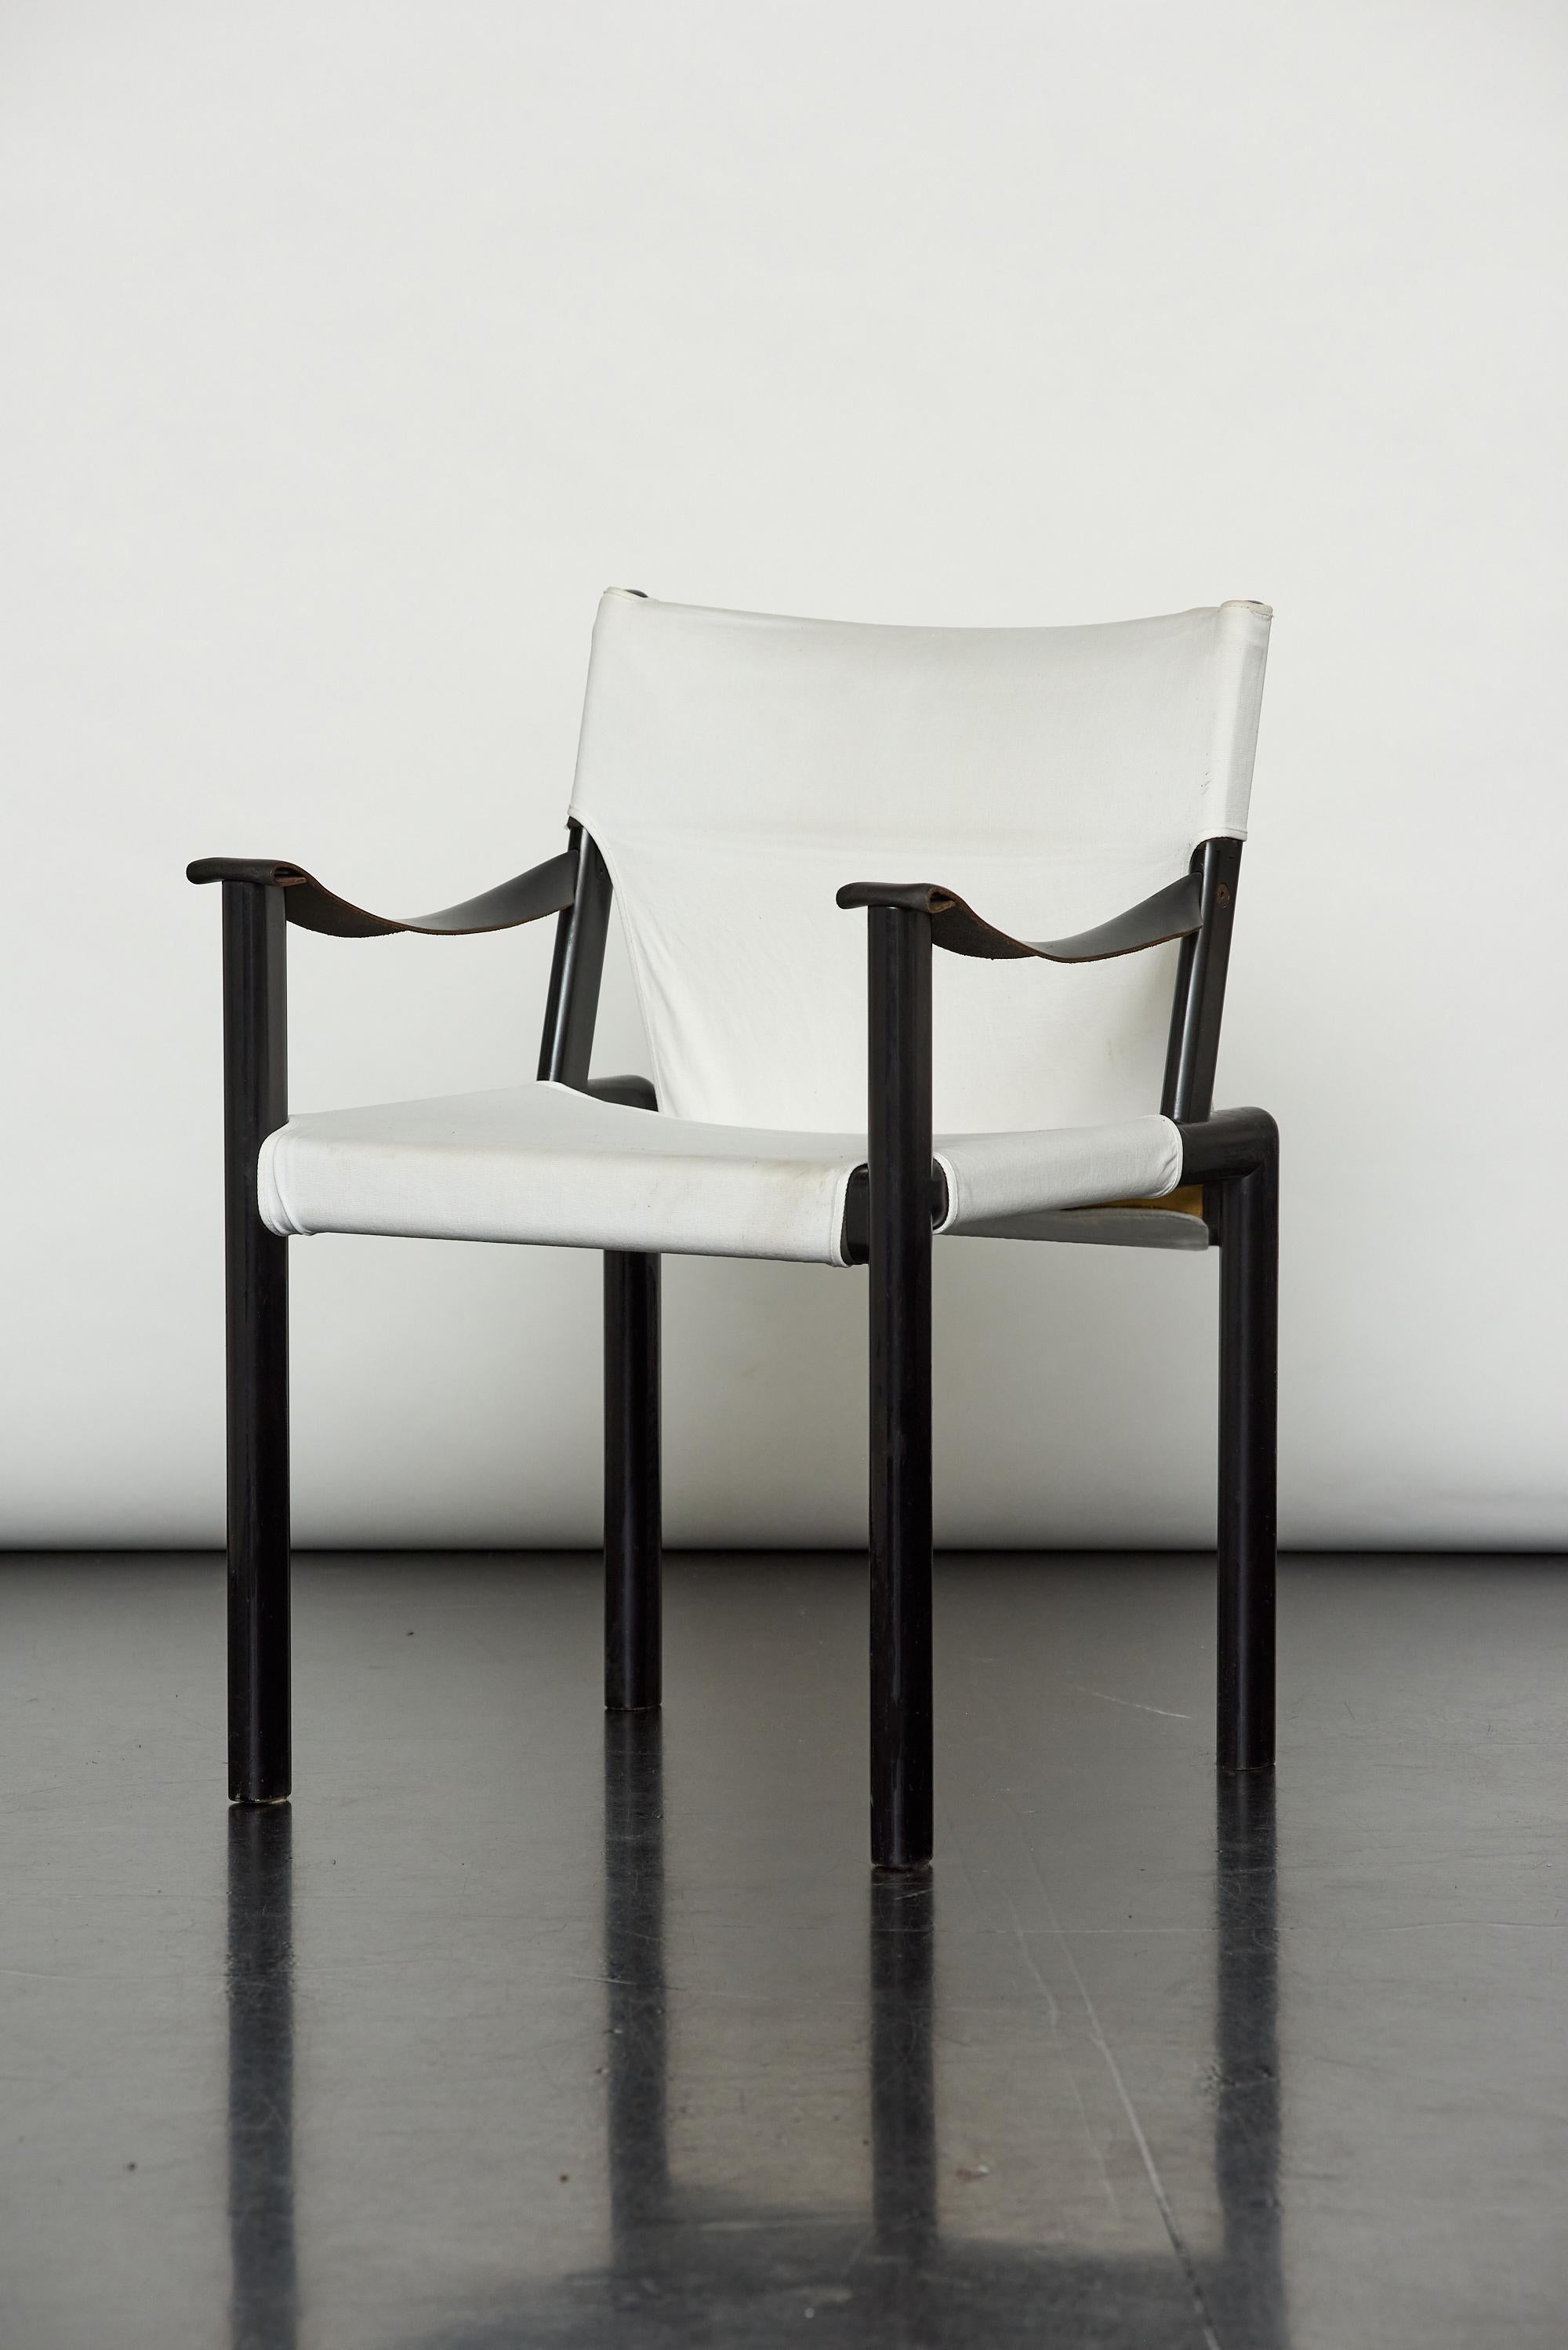 Set of 2 model 102, Pinta chairs designed by Piero de Martini for Cassina 1975
Black lacquered, rounded wood structure with canvas and leather straps.
Very good condition!
Price is per set of 2.